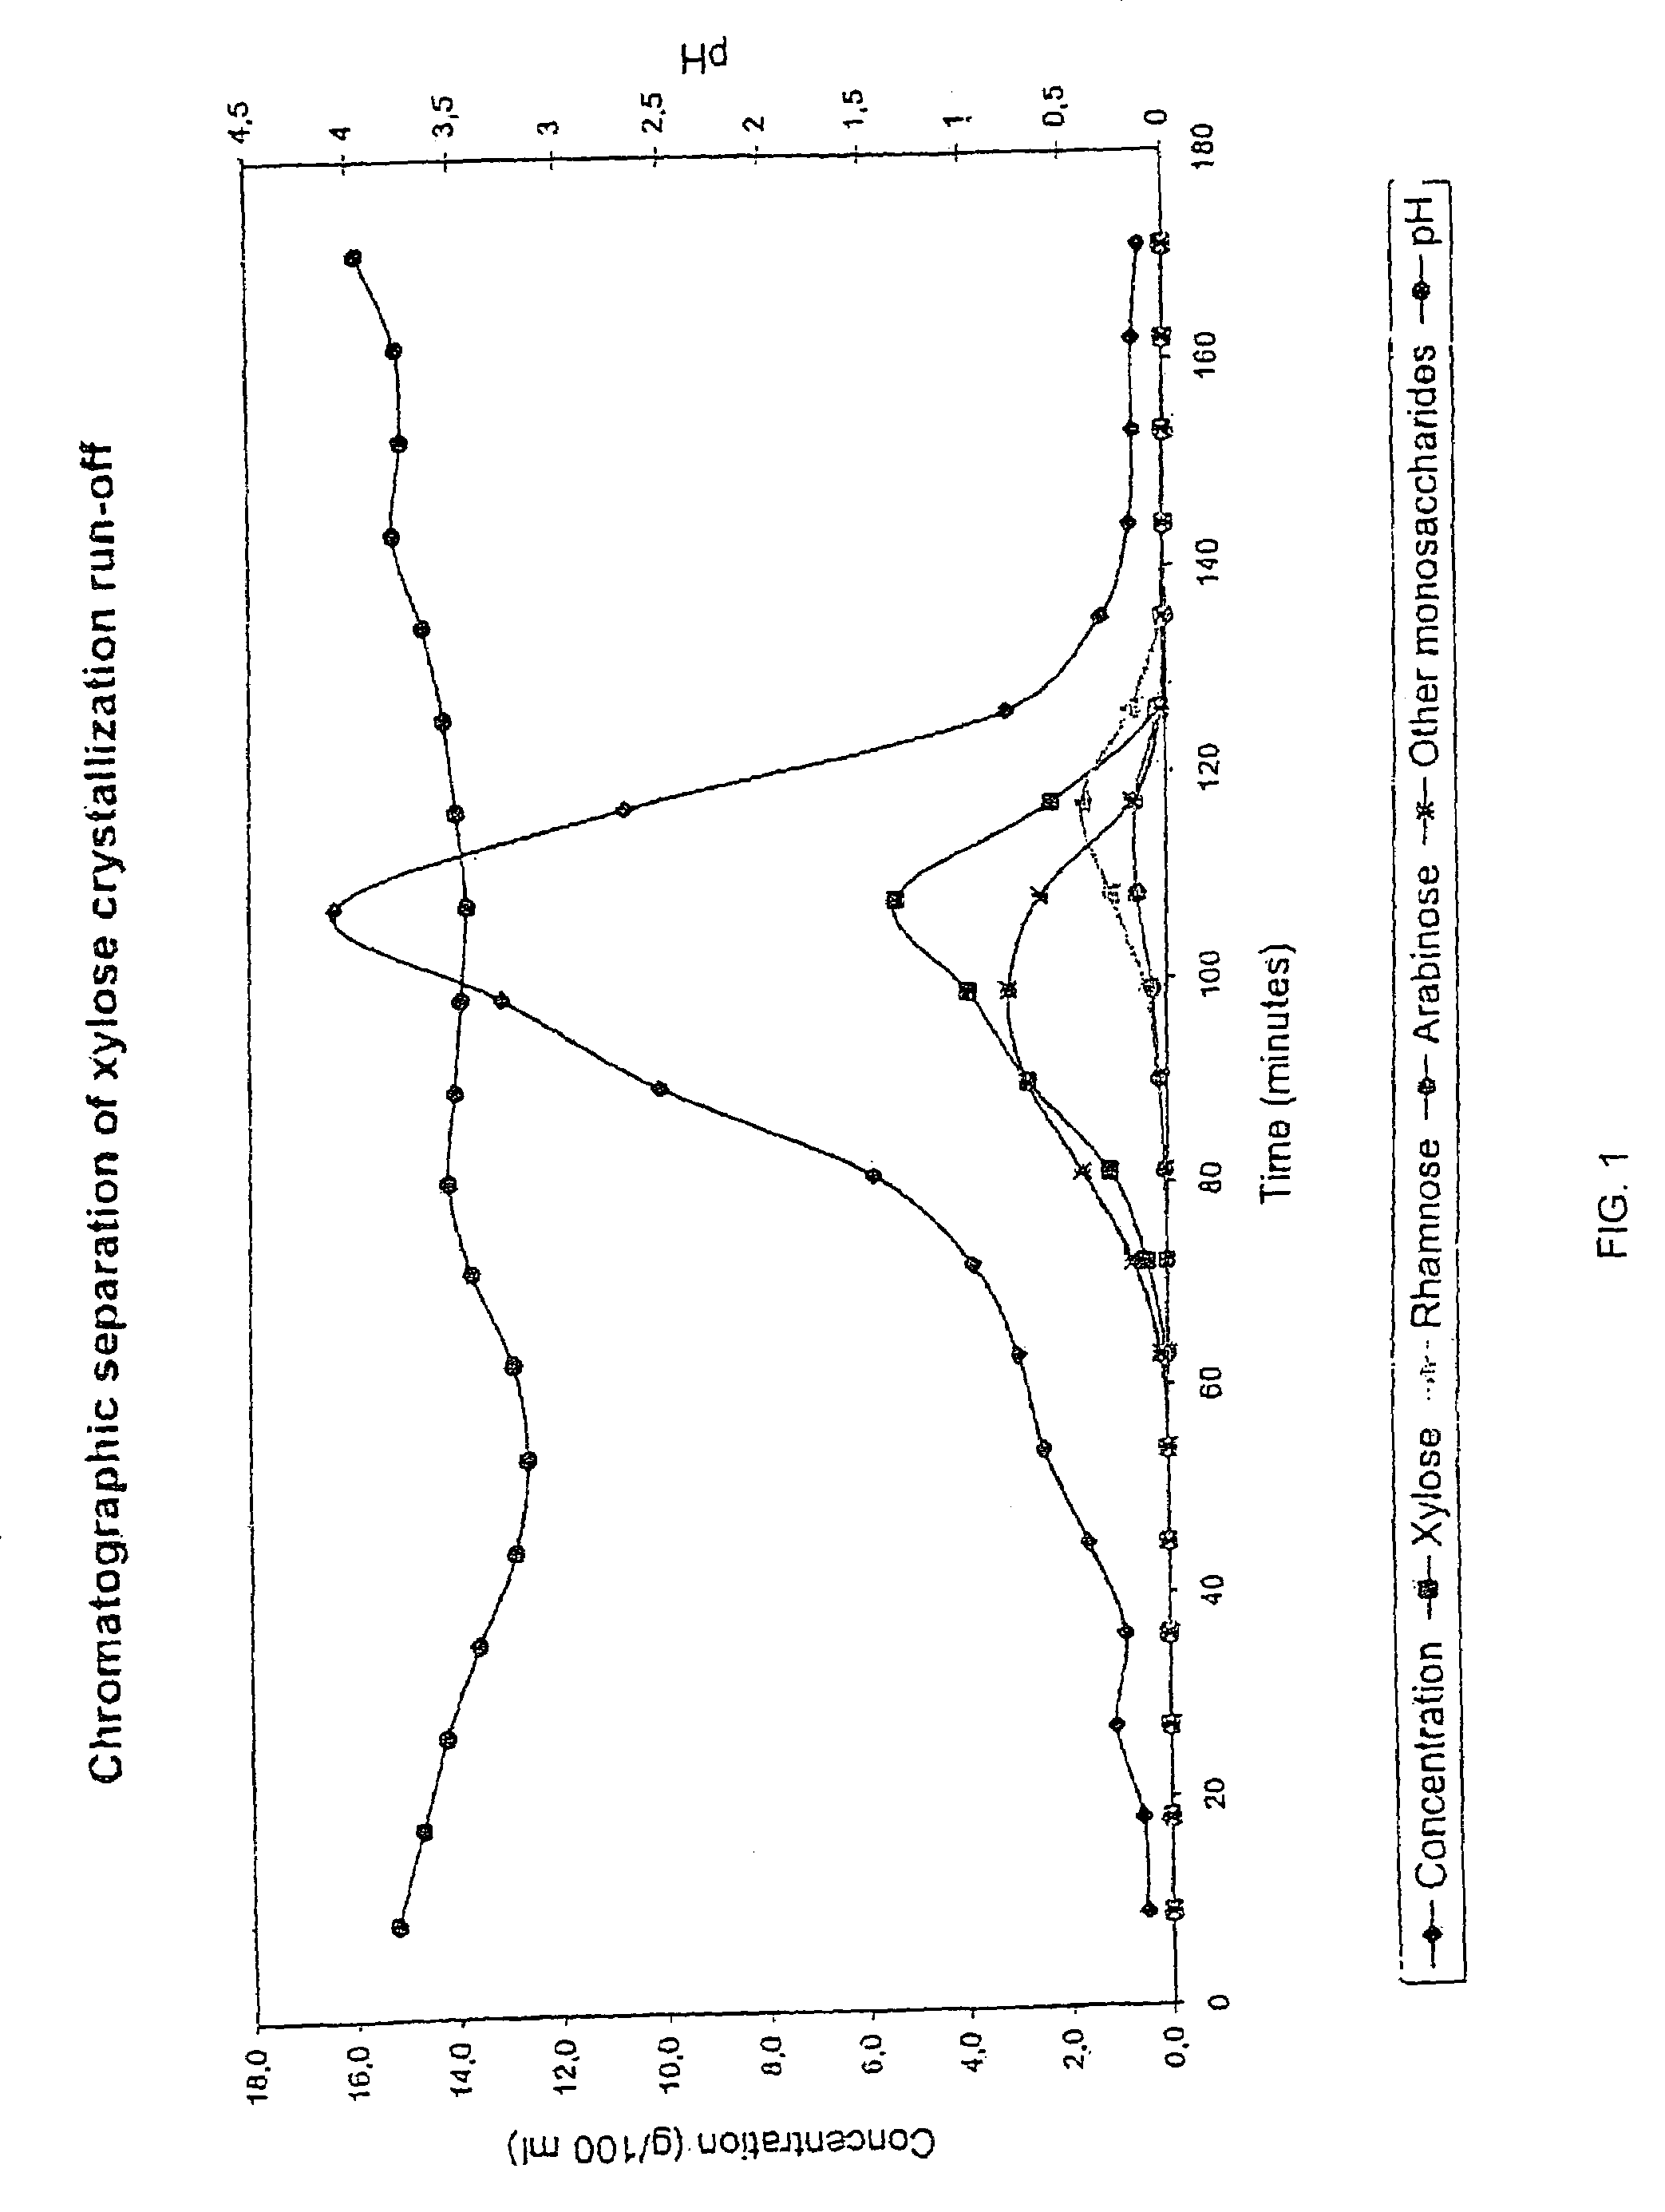 Method for recovering products